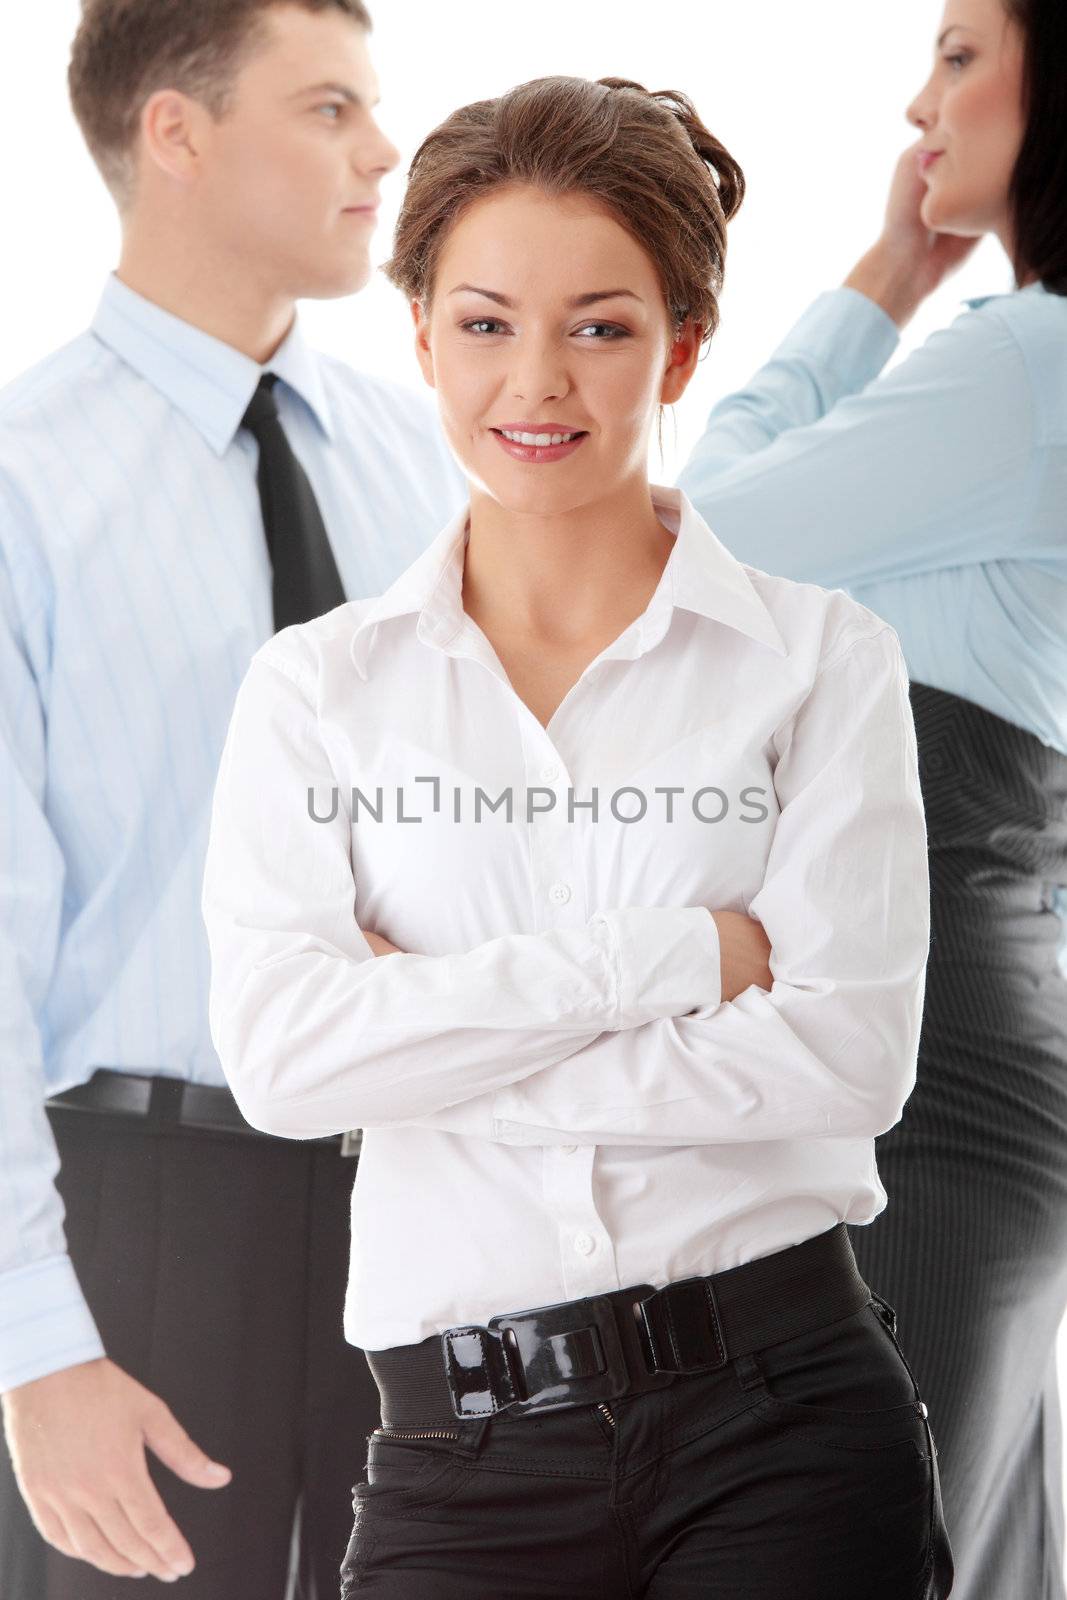 Businesswoman against two other businesspeople